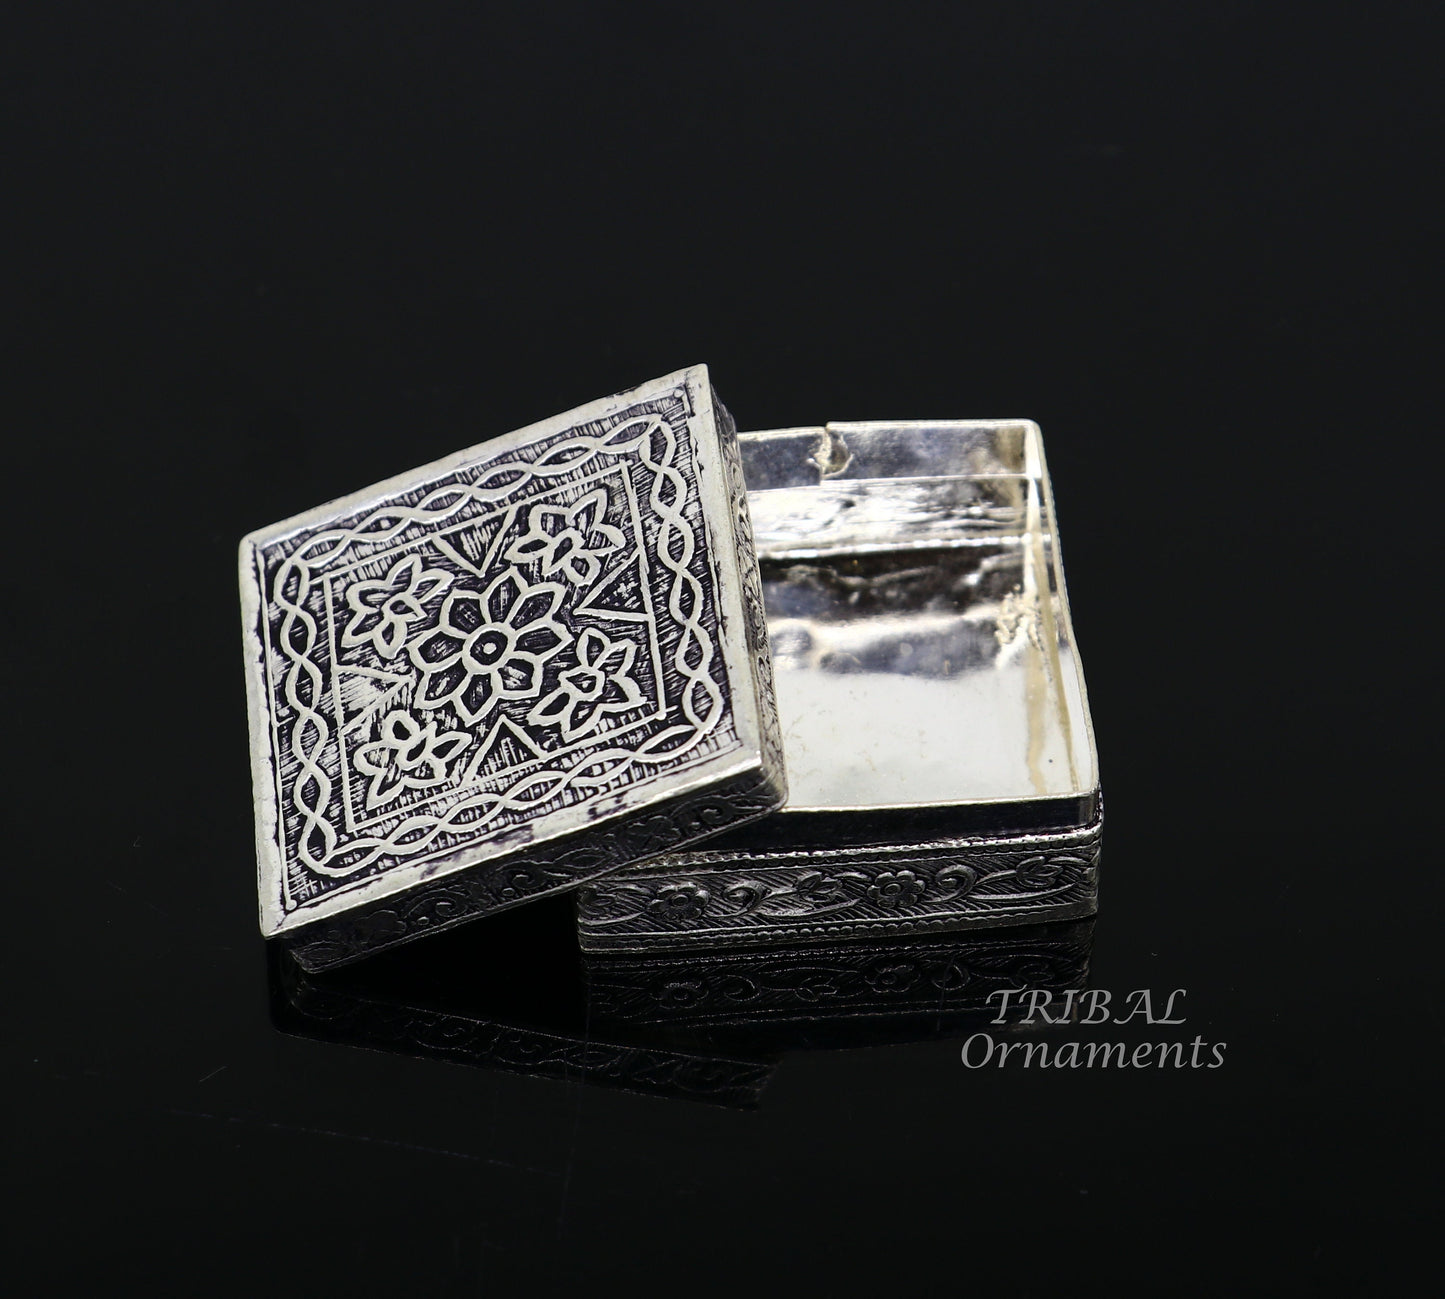 925 sterling silver trinket box, kajal box/casket box bridal square shape box collection, container box, eyeliner box gifting art stb713 - TRIBAL ORNAMENTS